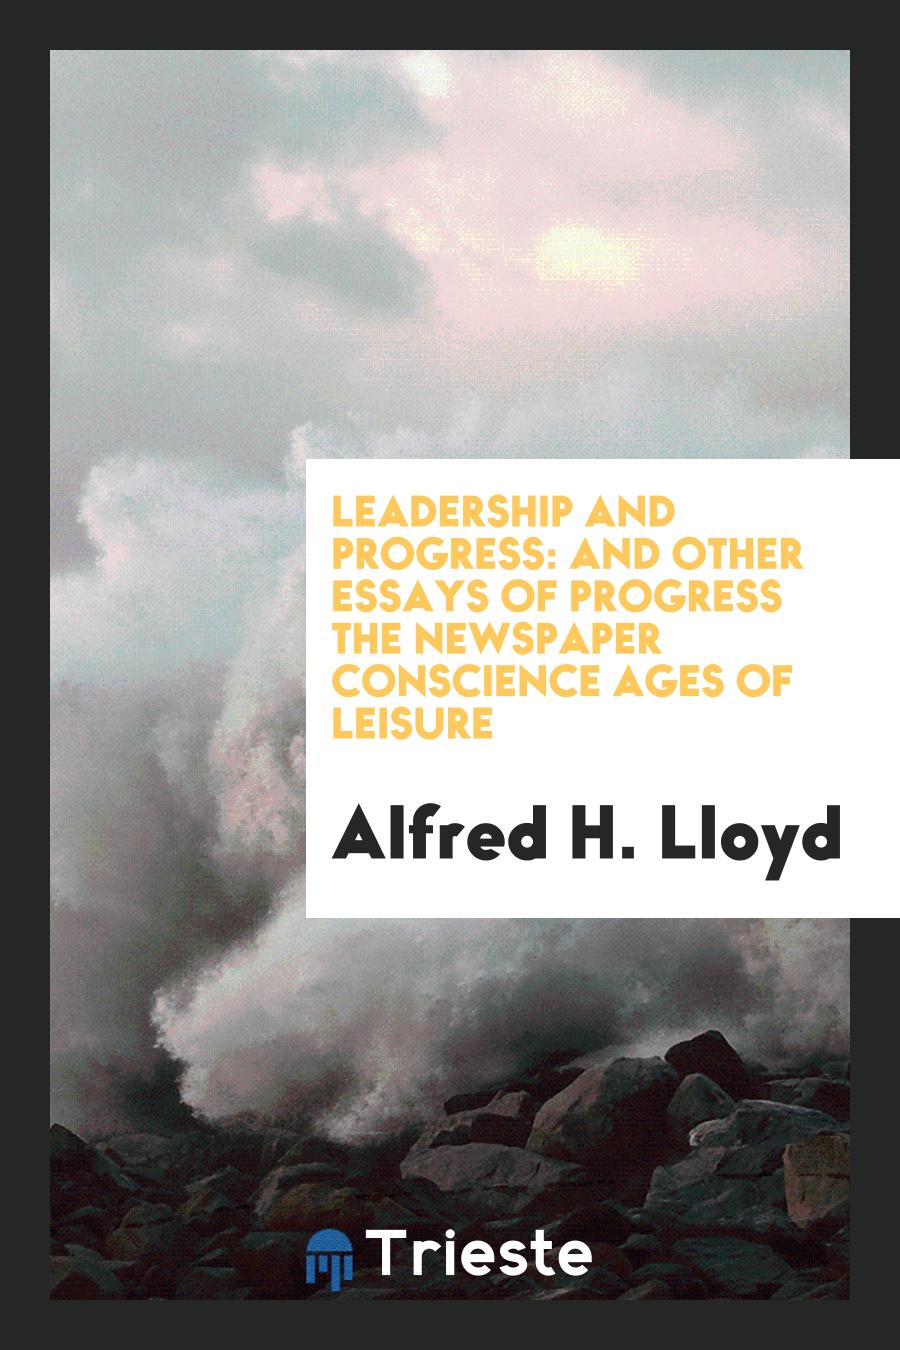 Leadership and Progress: And Other Essays of Progress the Newspaper Conscience Ages of Leisure